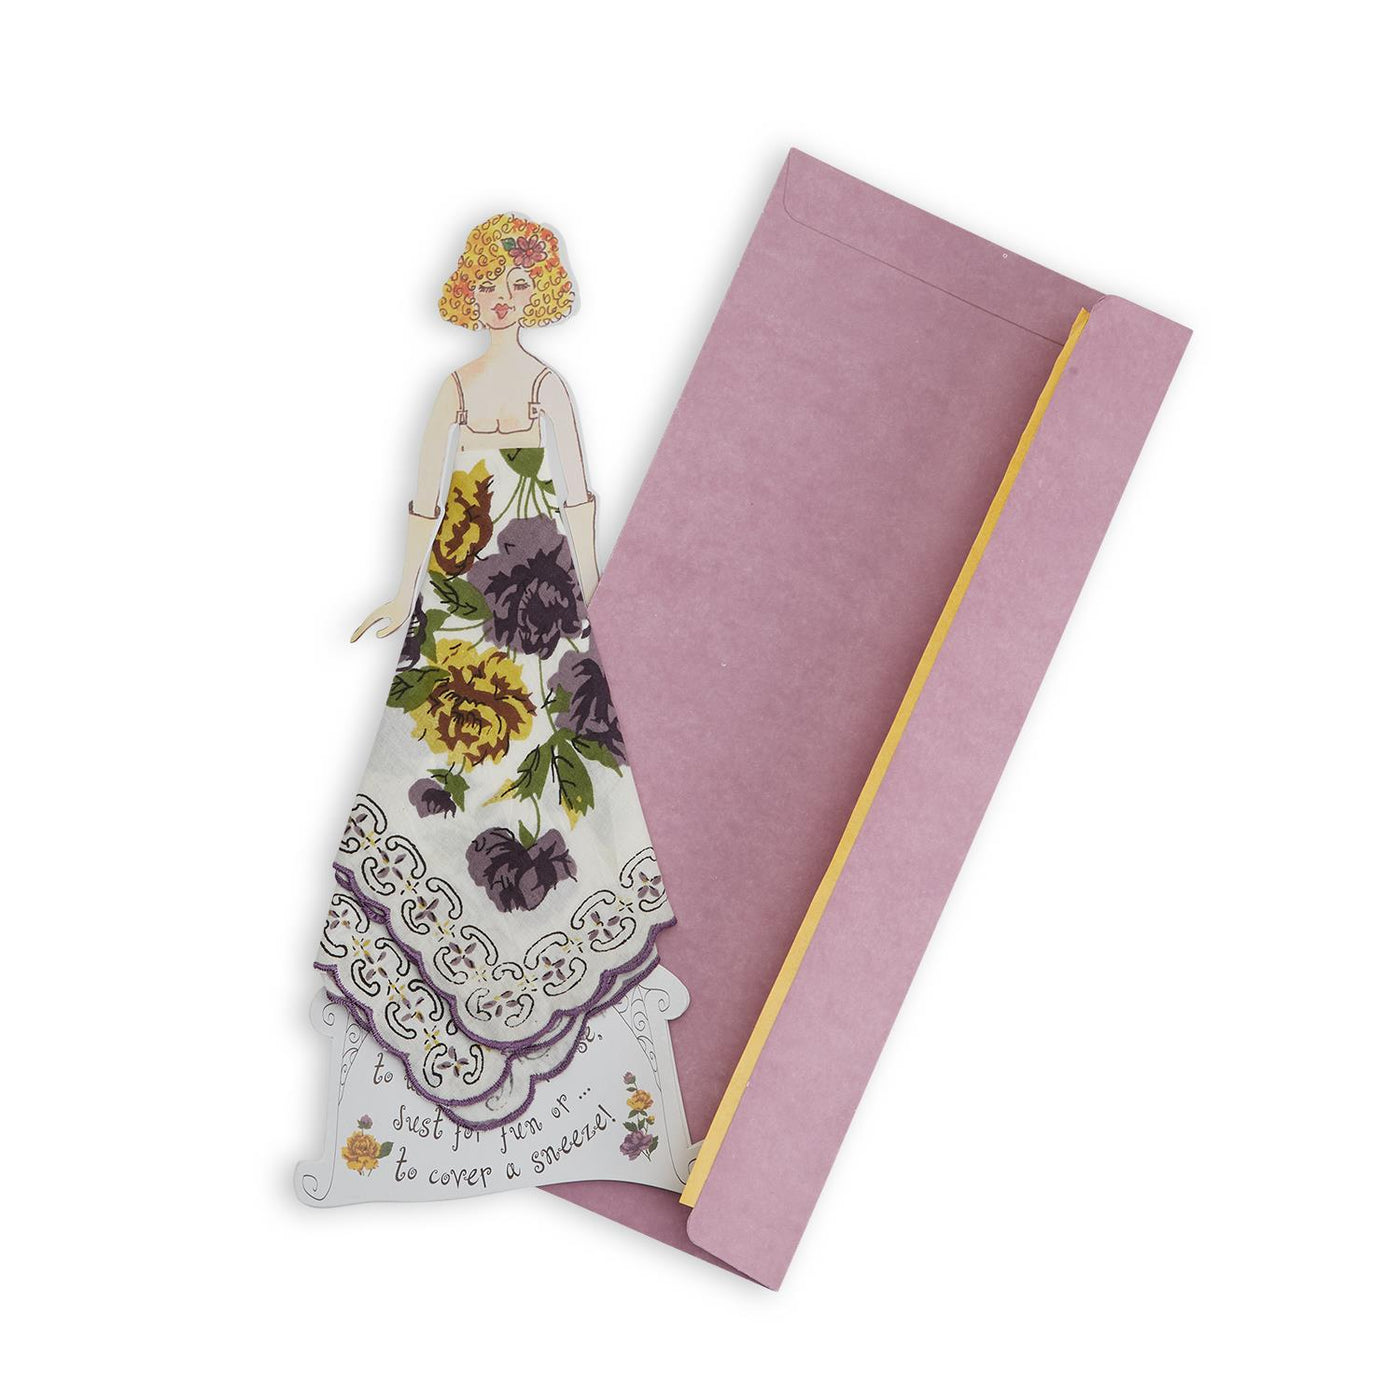 Everyday Handkerchief Greetings Greeting Card with Mailing Envelope